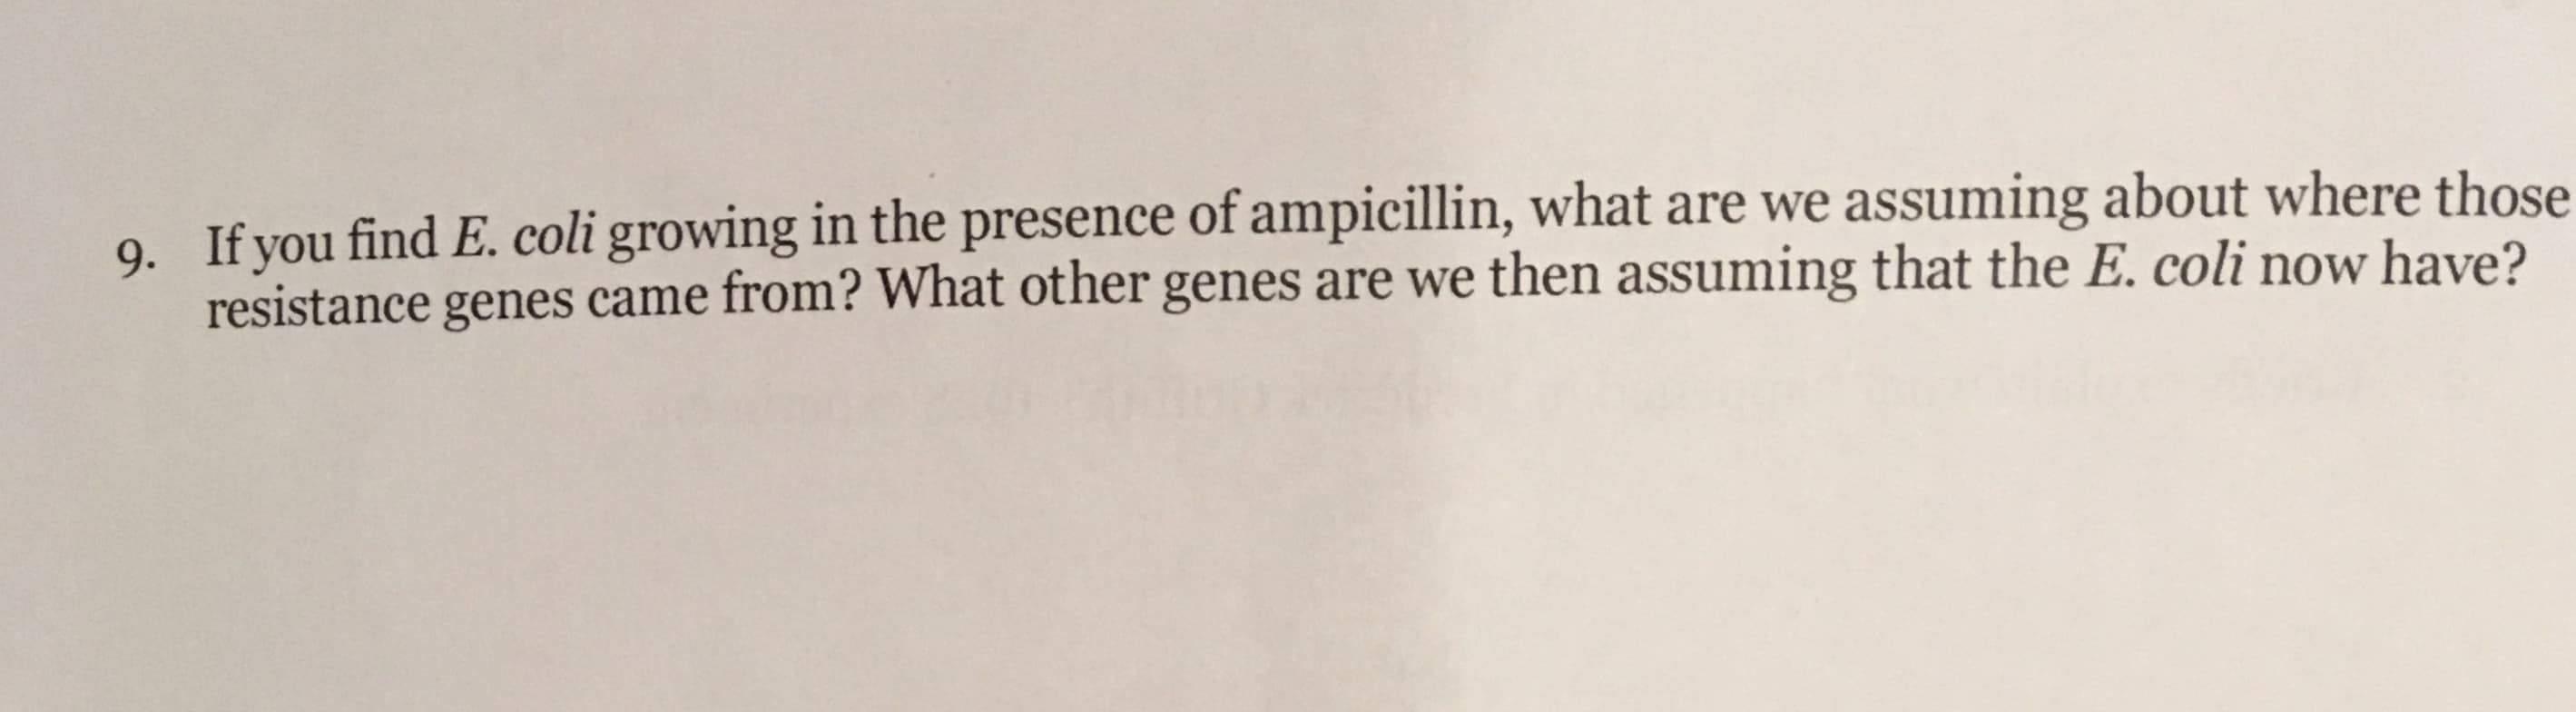 If you find E. coli growing in the presence of ampicillin, what are we assuming about where those
9.
resistance genes came from? What other genes are we then assuming that the E. coli now have?
